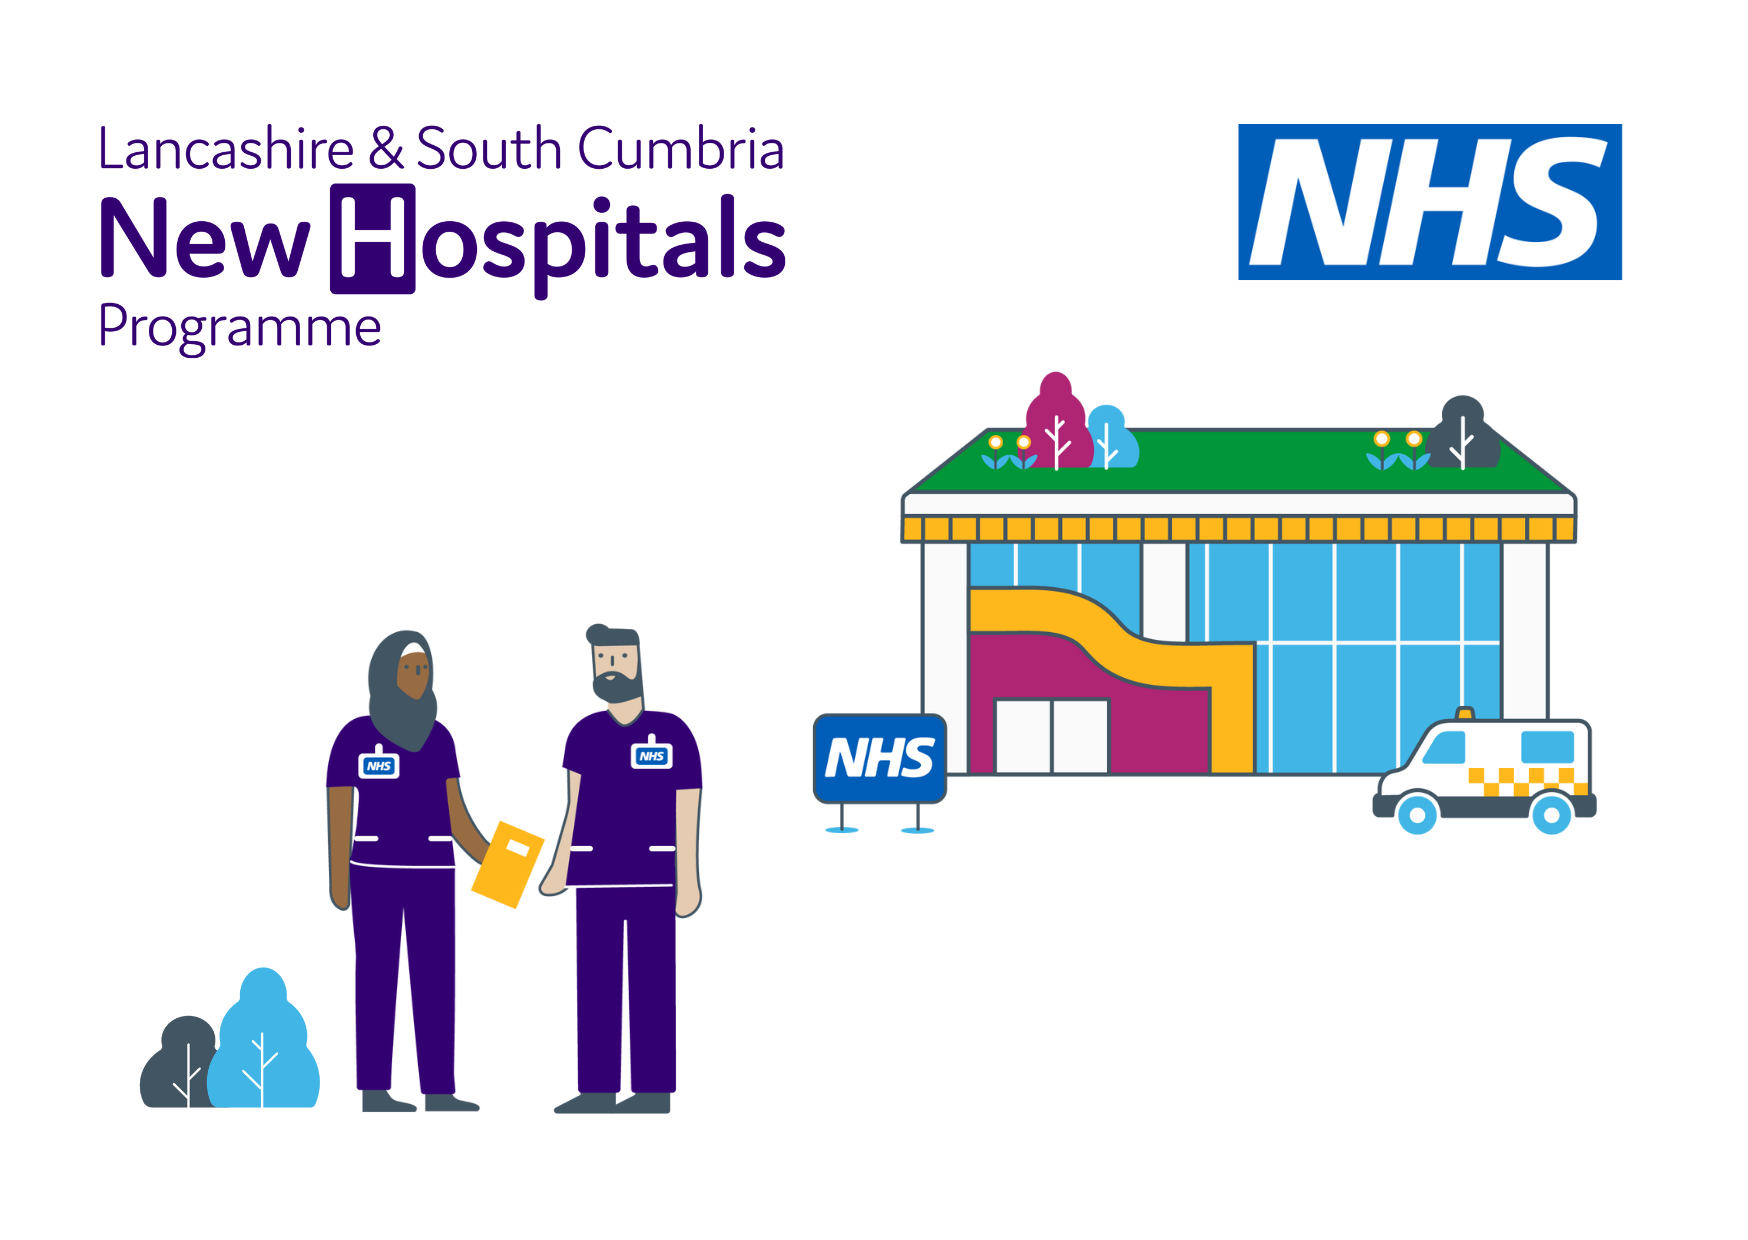 New Hospitals Programme illustration showing two medical professionals and a hospital behind them